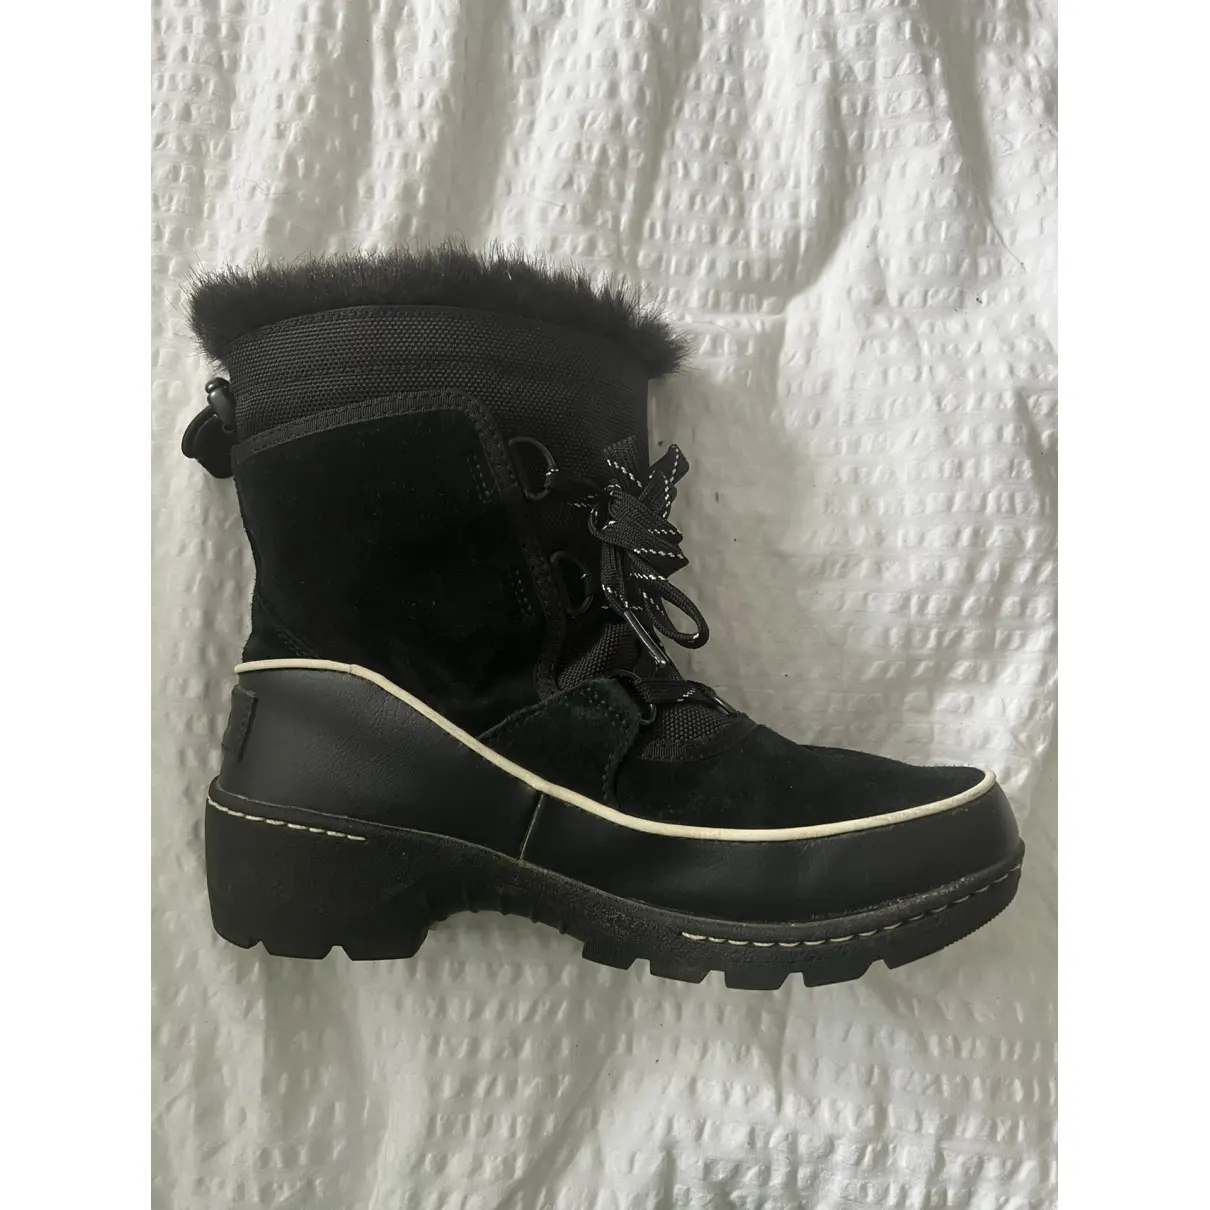 Buy Sorel Cloth ankle boots online